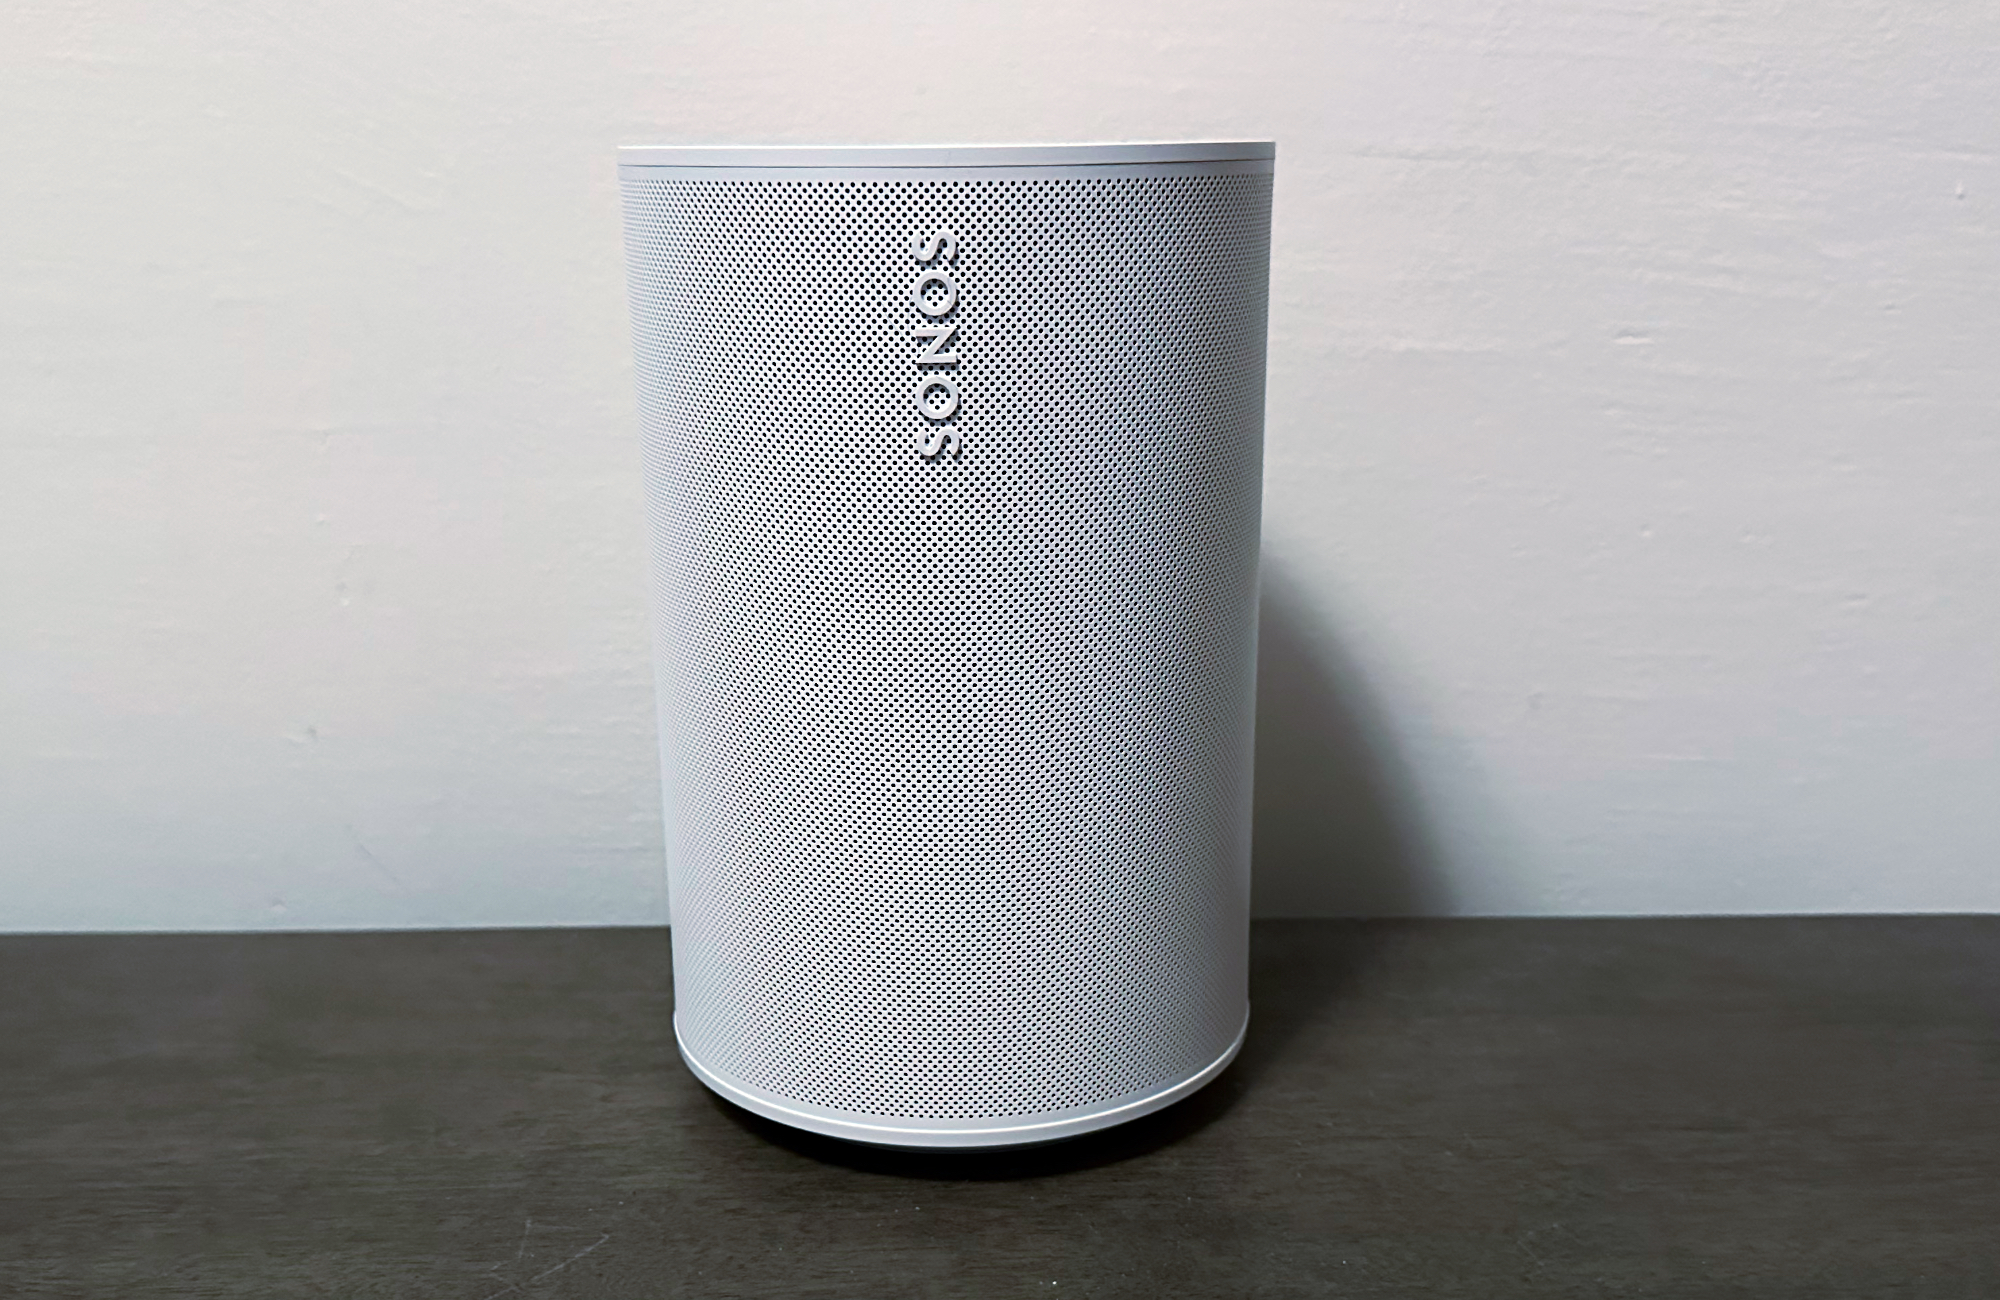 Sonos Era smart speakers now available to buy: Here's what's new